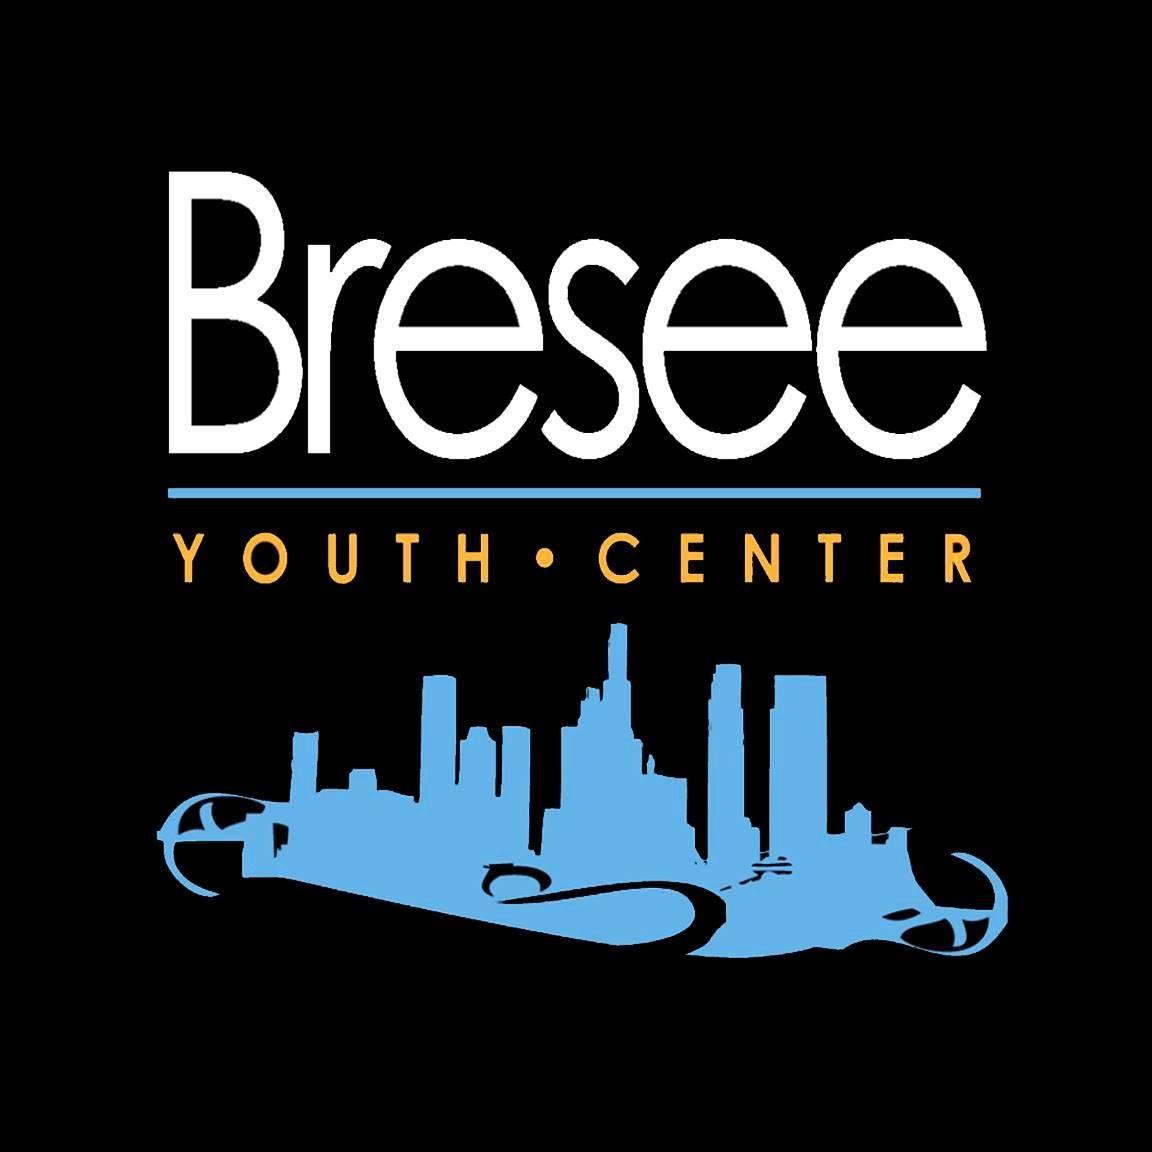 The Bresee logo has a black background with "Bresee" in white and underlined in light blue. Below in orange are the words "YOUTH CENTER" with a solid blue graphic of the LA skyline below.